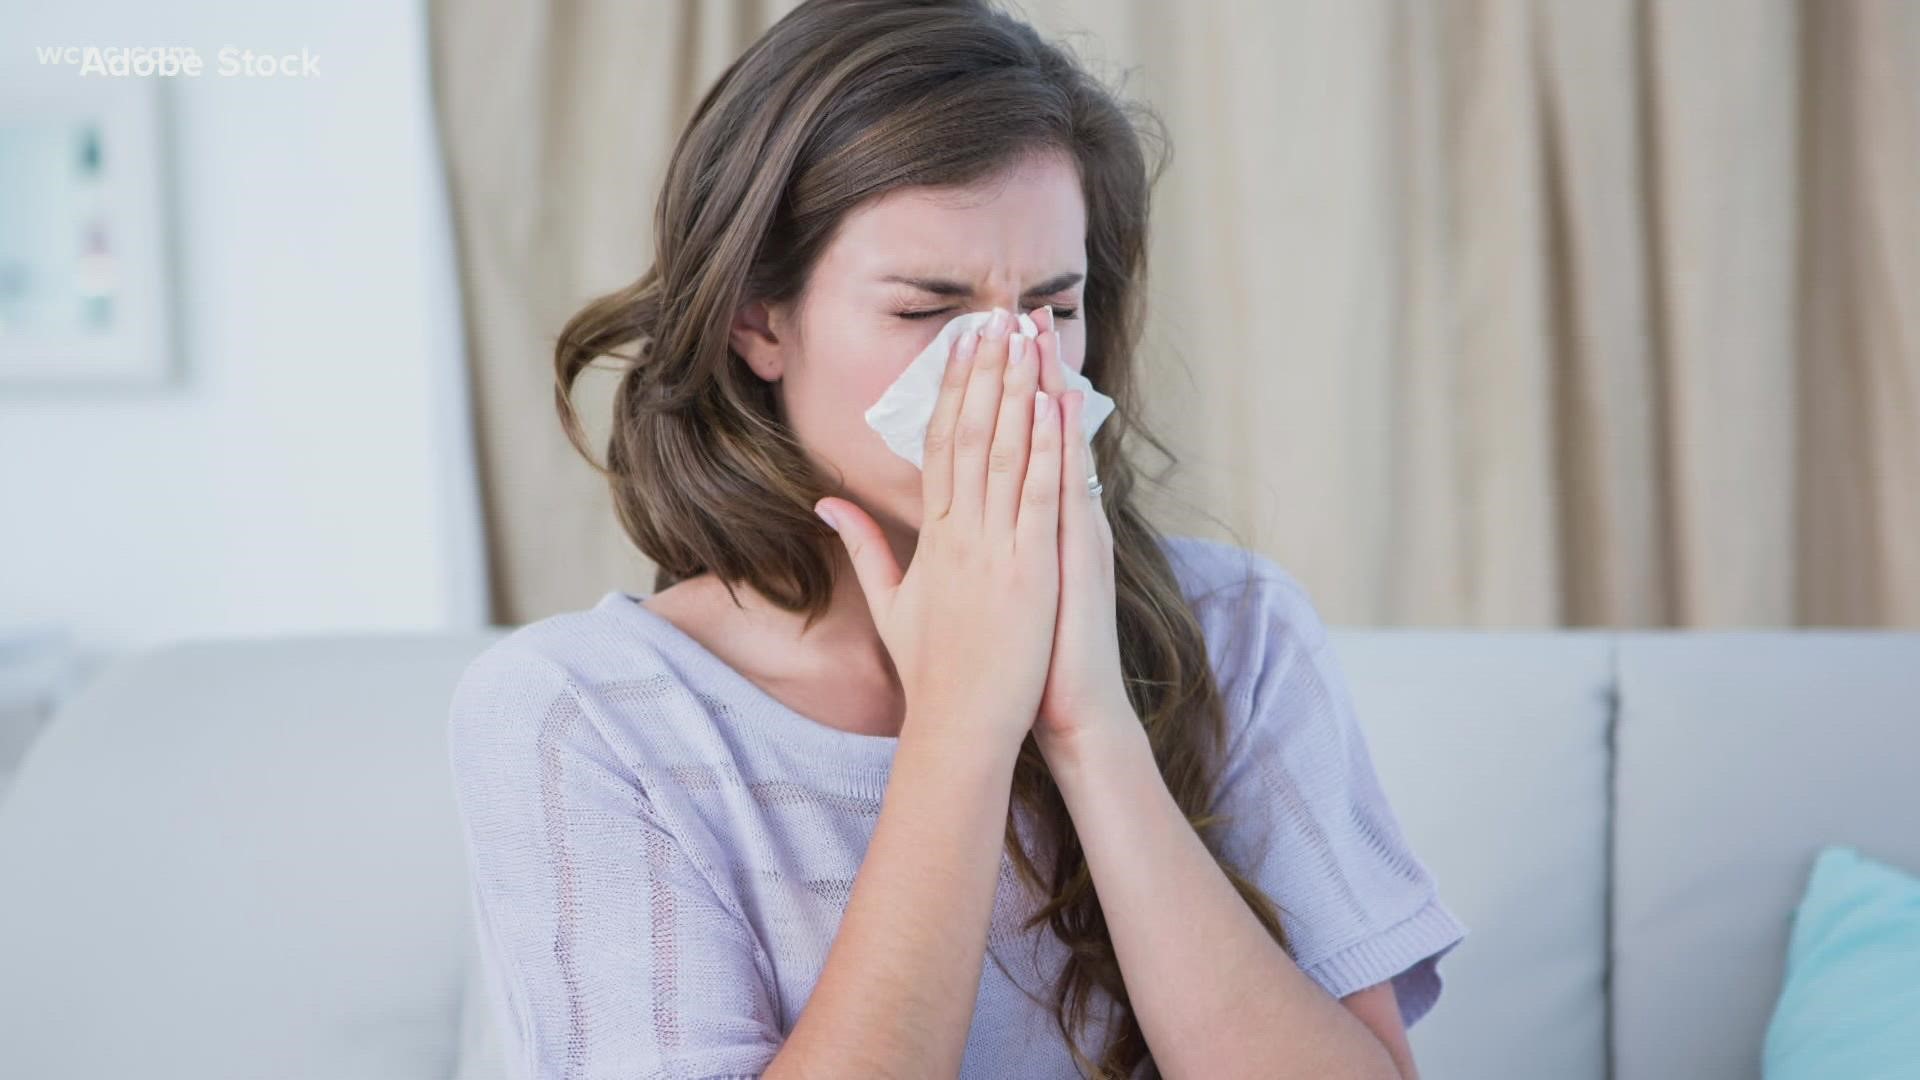 Dr. Flora Stay, a clinical professor at the University of Southern California, talks to Carolyn Bruck about the chemicals that could make allergies worse.